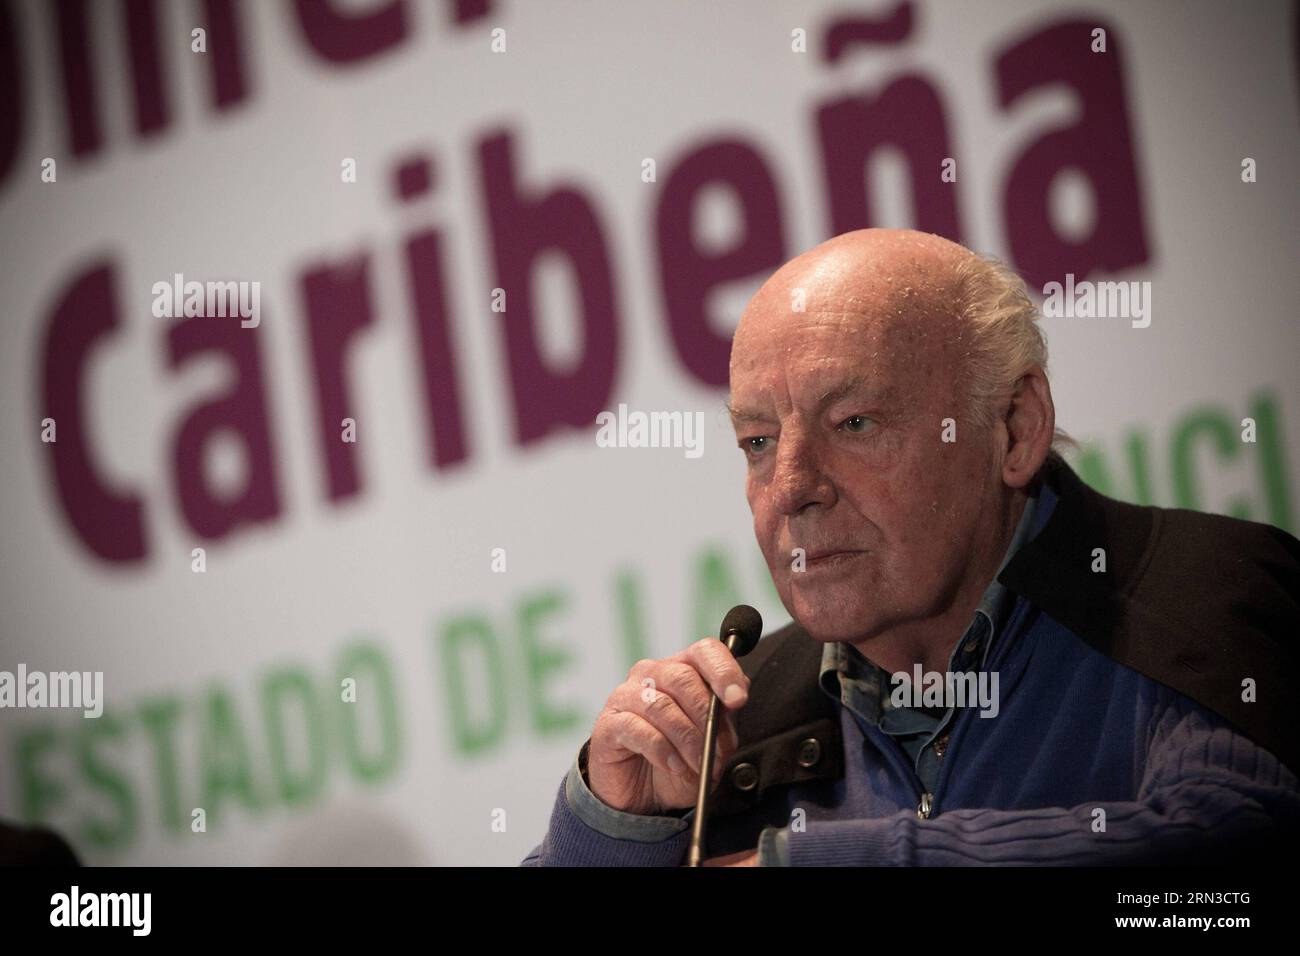 (150413) -- MONTEVIDEO, April 13, 2015 -- Photo taken on Nov. 9, 2012 shows Uruguayan writer Eduardo Galeano participating in the 24th General Assembly of Latin American and Caribbean Conference of Social Sciences in Mexico City, capital of Mexico. Uruguayan writer and journalist Eduardo Galeano, best known for his work Open Veins of Latin America, died Monday at the age of 74. ) (jp) URUGUAY-MONTEVIDEO-CULTURE-EDUARDO GALEANO PEDROxMERA PUBLICATIONxNOTxINxCHN   Montevideo April 13 2015 Photo Taken ON Nov 9 2012 Shows Uruguayan Writer Eduardo Galeano participating in The 24th General Assembly Stock Photo